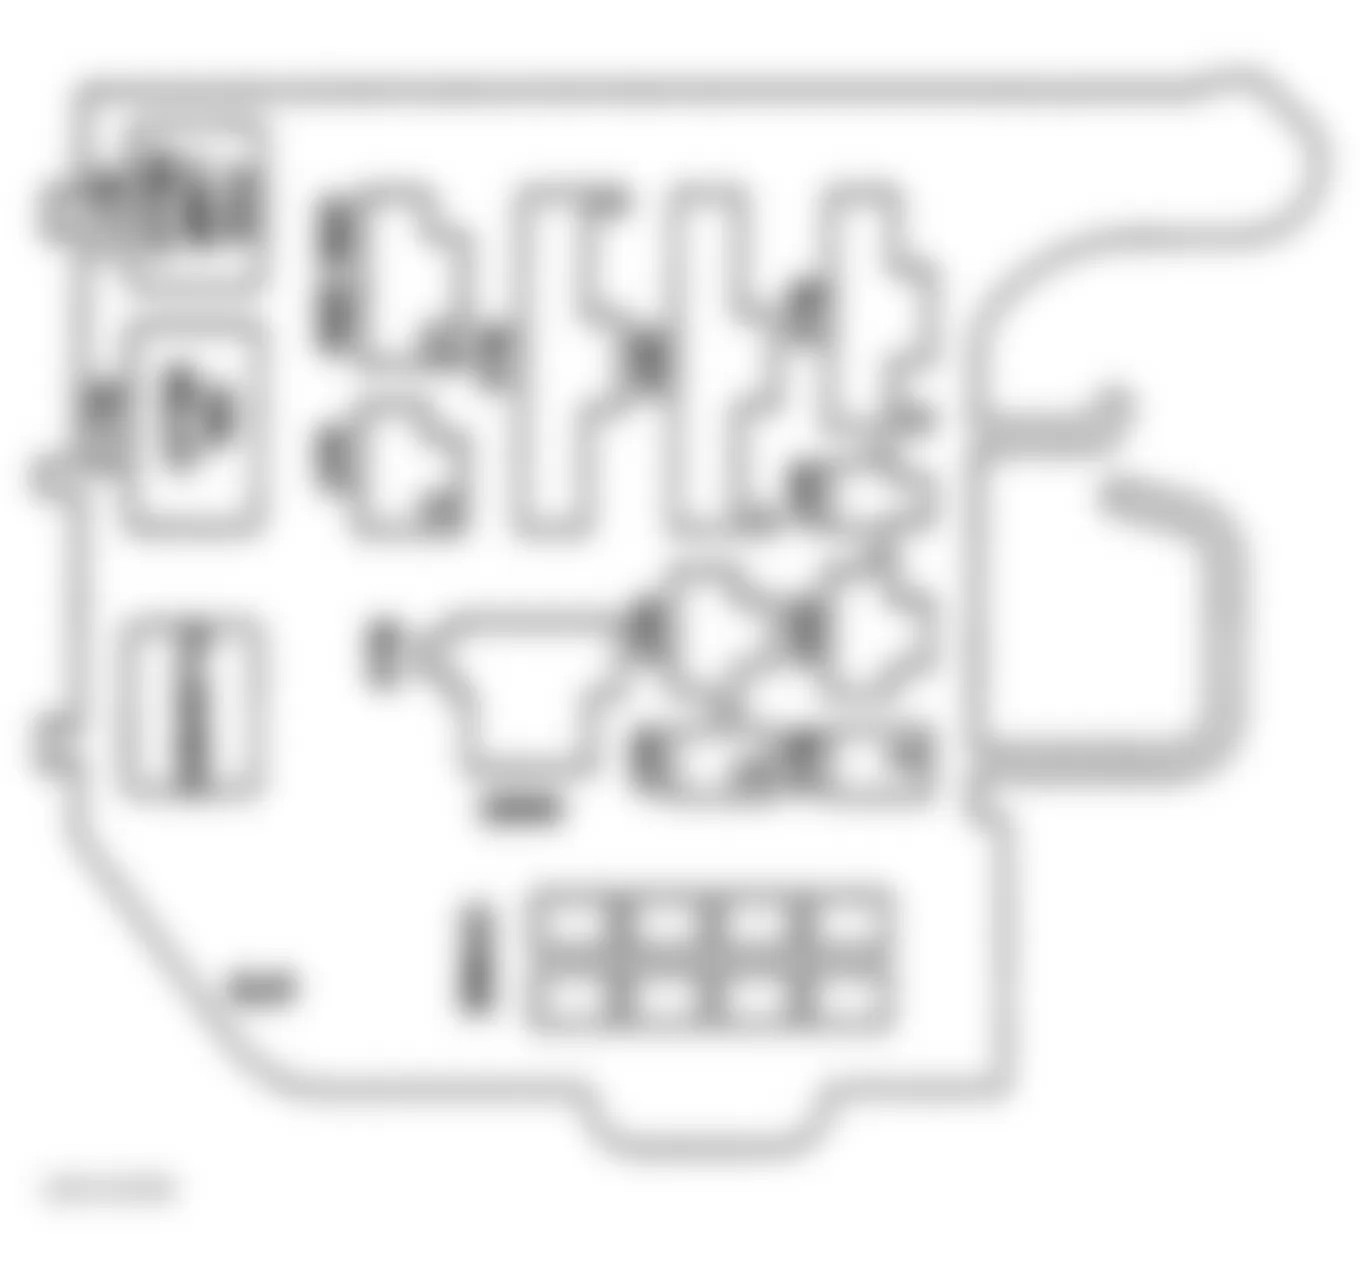 GMC Suburban C1500 1997 - Component Locations -  Identifying Convenience Center Components